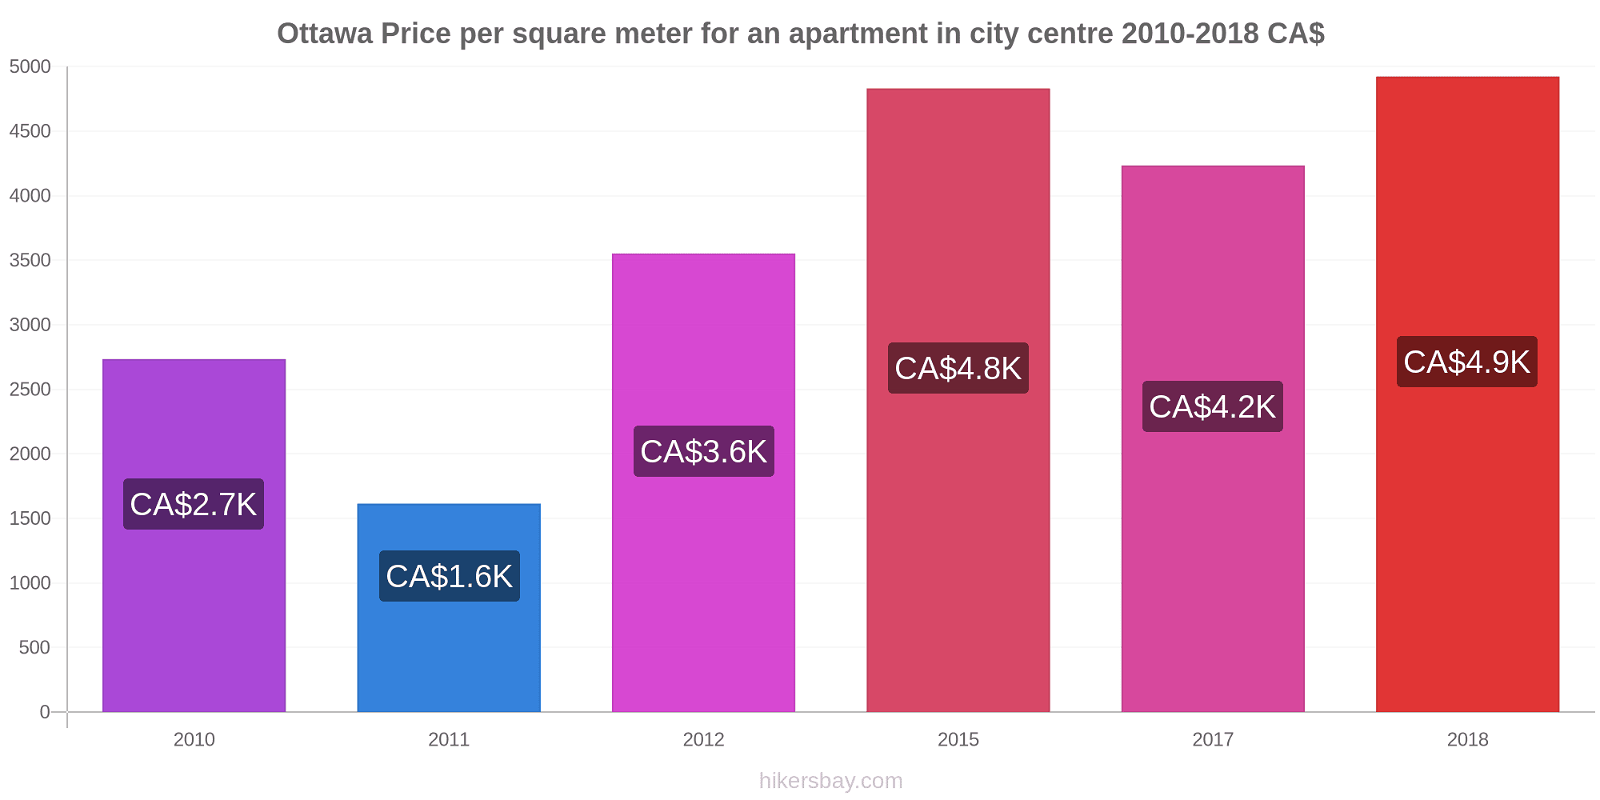 Ottawa price changes Price per square meter for an apartment in city centre hikersbay.com